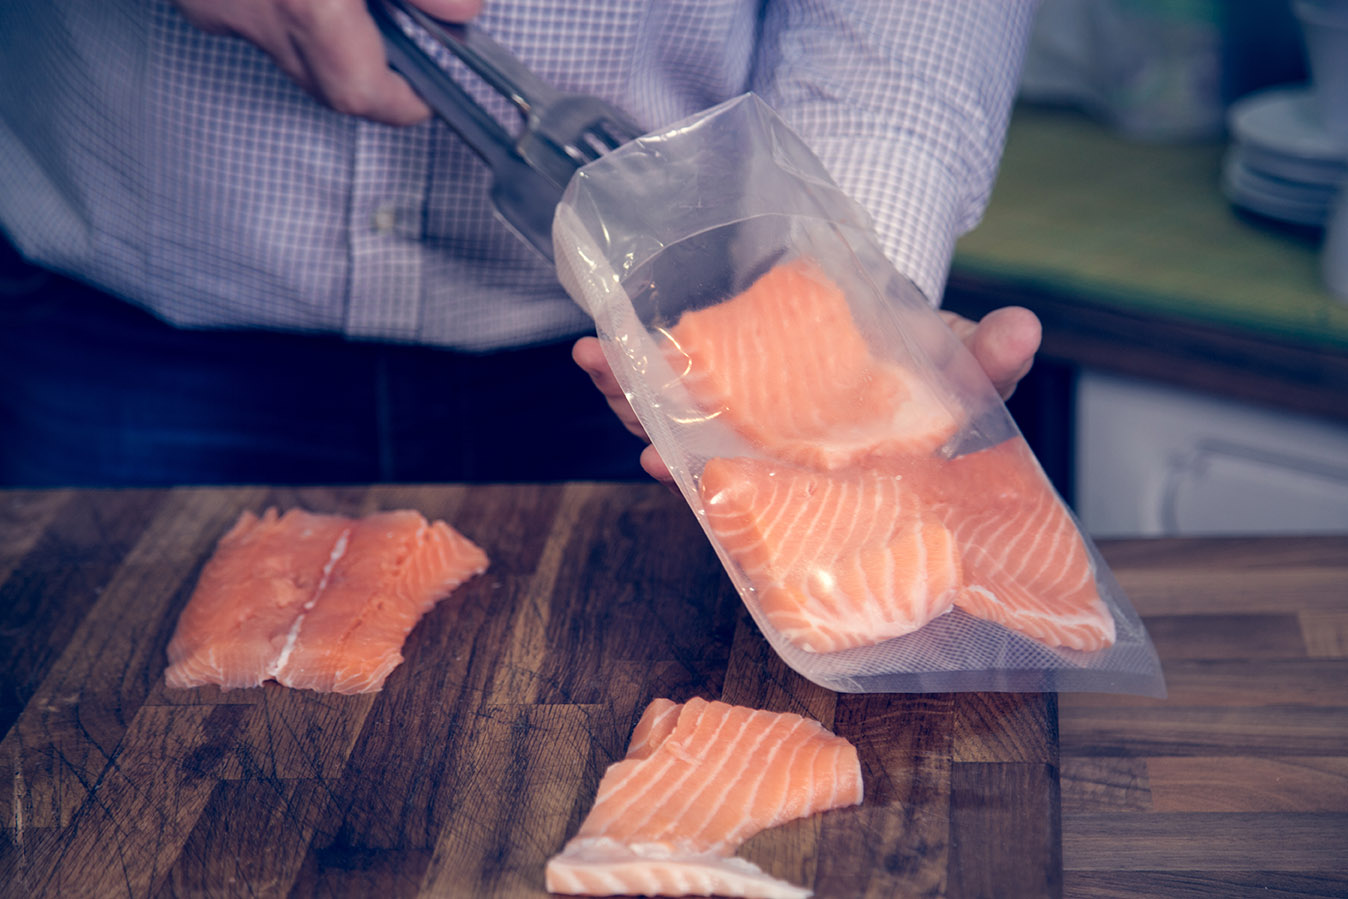 WHAT ARE THE BENEFITS OF SOUS-VIDE COOKING?